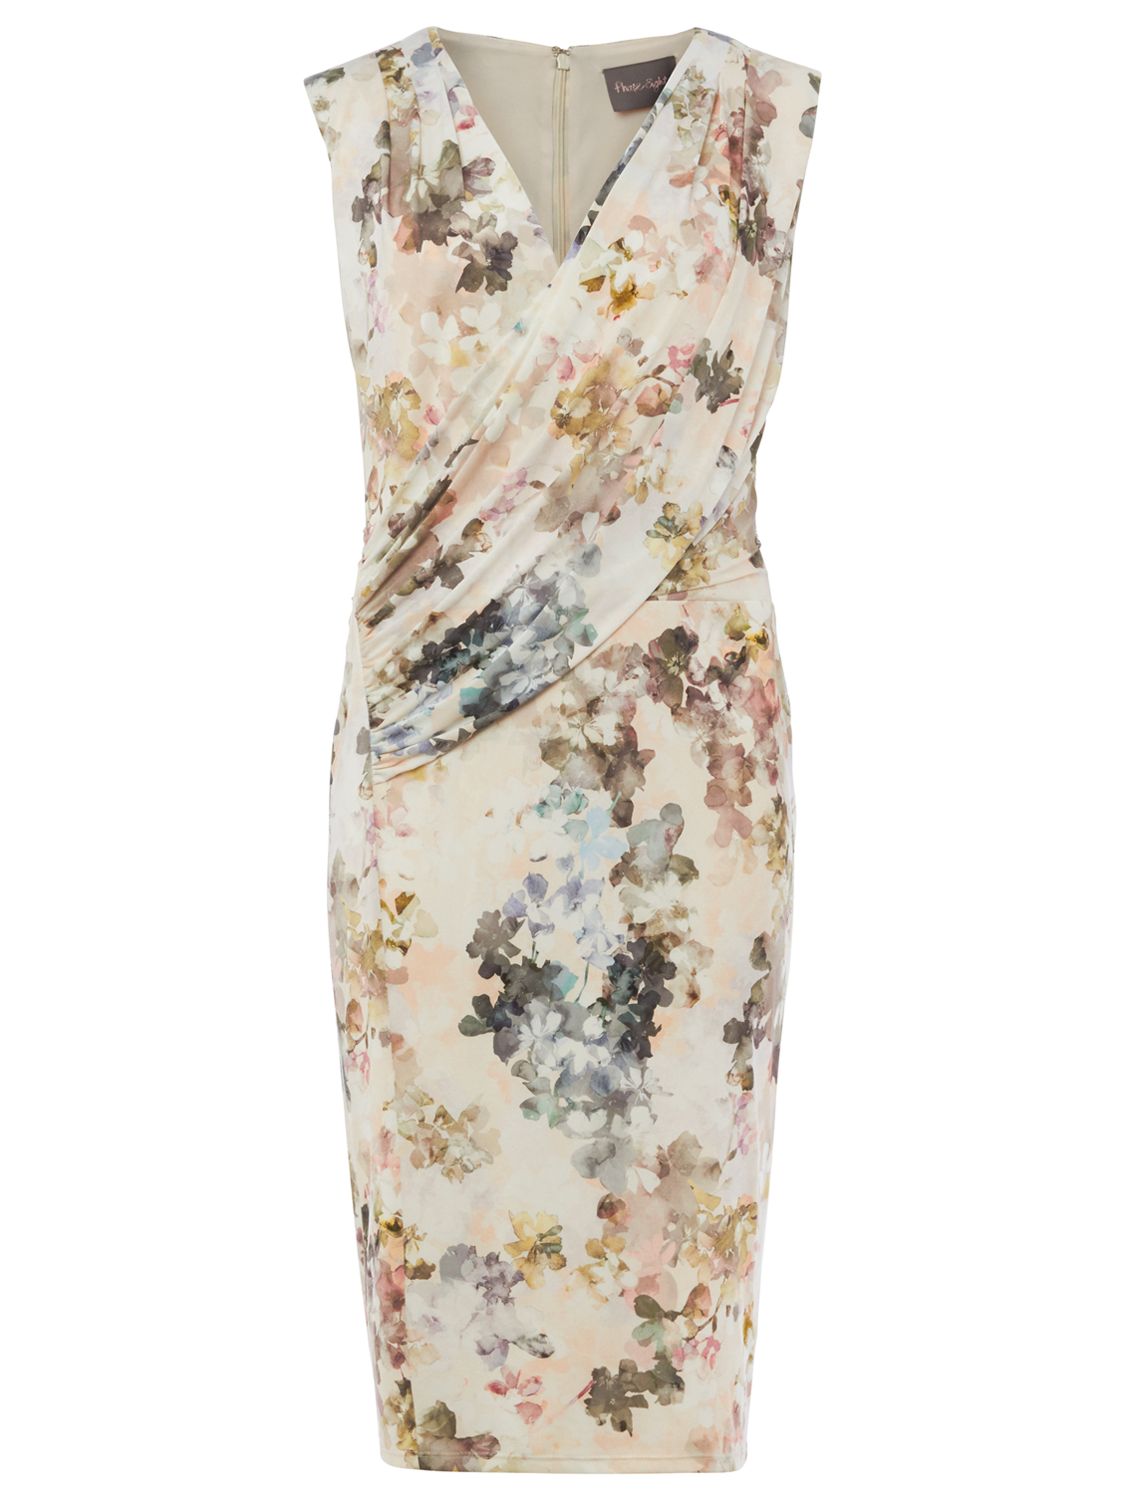 Phase Eight Marthe Floral Print Dress, Ivory/Multi